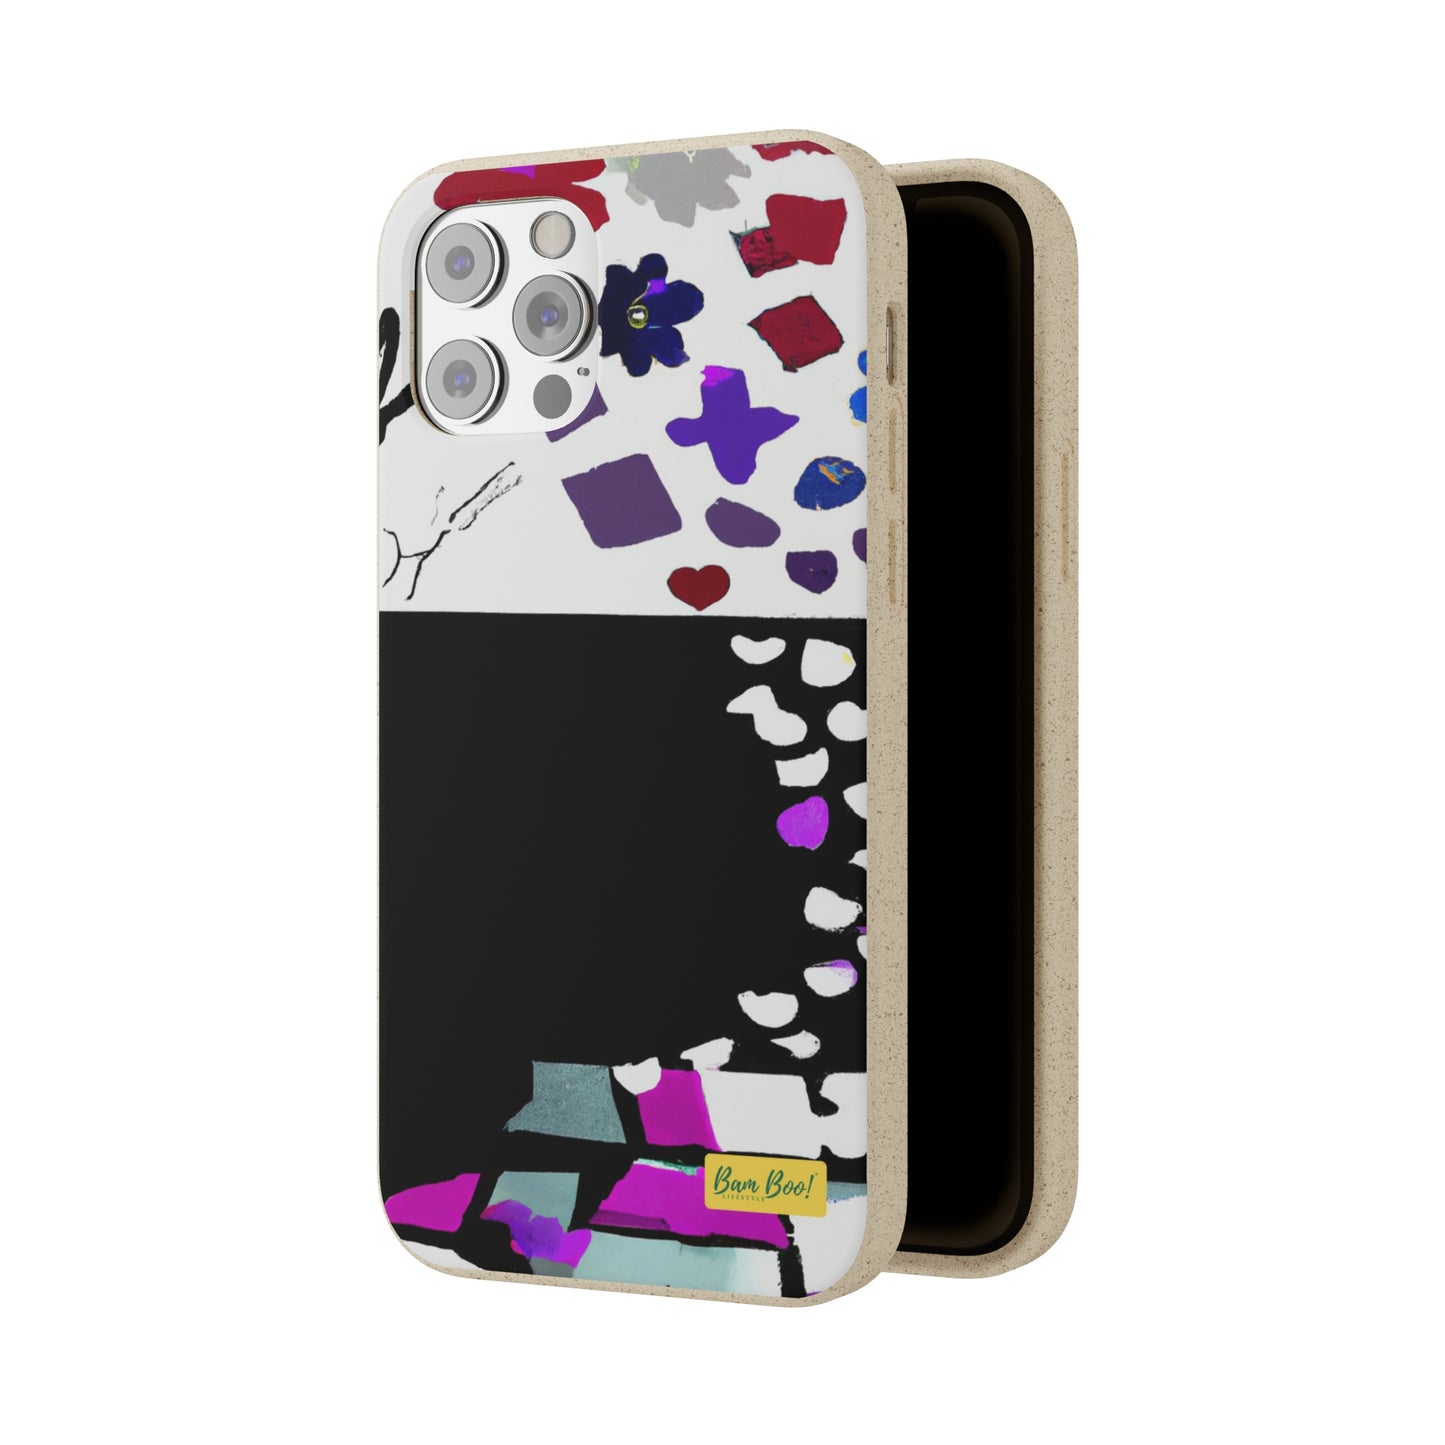 "Unity in Contrast: Exploring Beauty through Creative Collage" - Bam Boo! Lifestyle Eco-friendly Cases